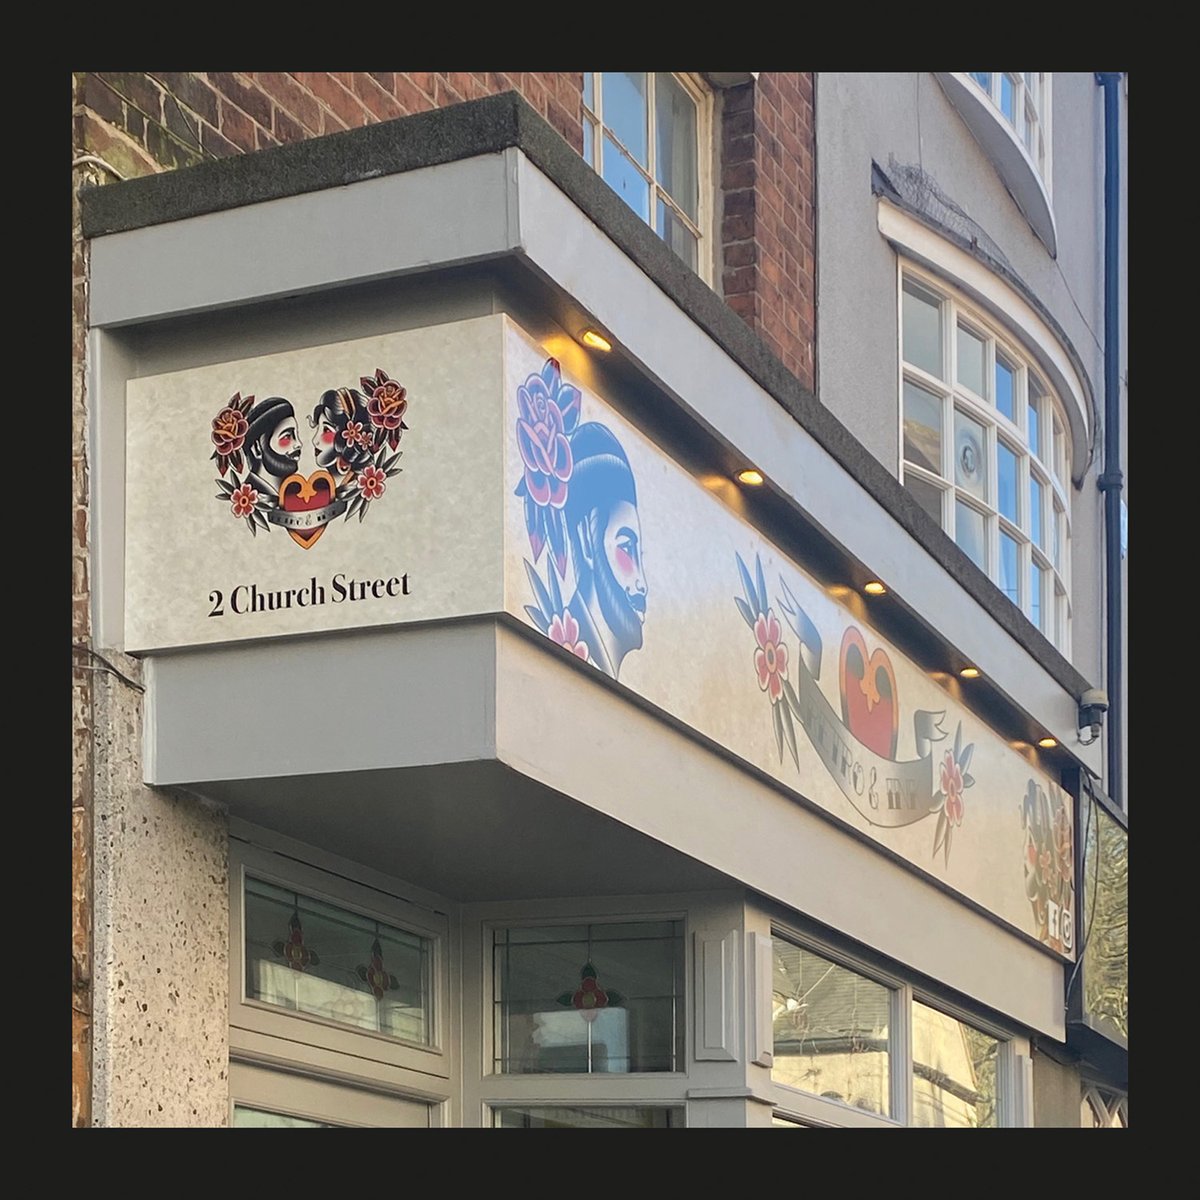 We supply signs for - Shops, Businesses, Exhibitions, Wall Graphics plus much more 0115 961 6060 or sales@cushionprint.co.uk  #businesssigns #shopsigns #signsupplier #signprint #signinstaller